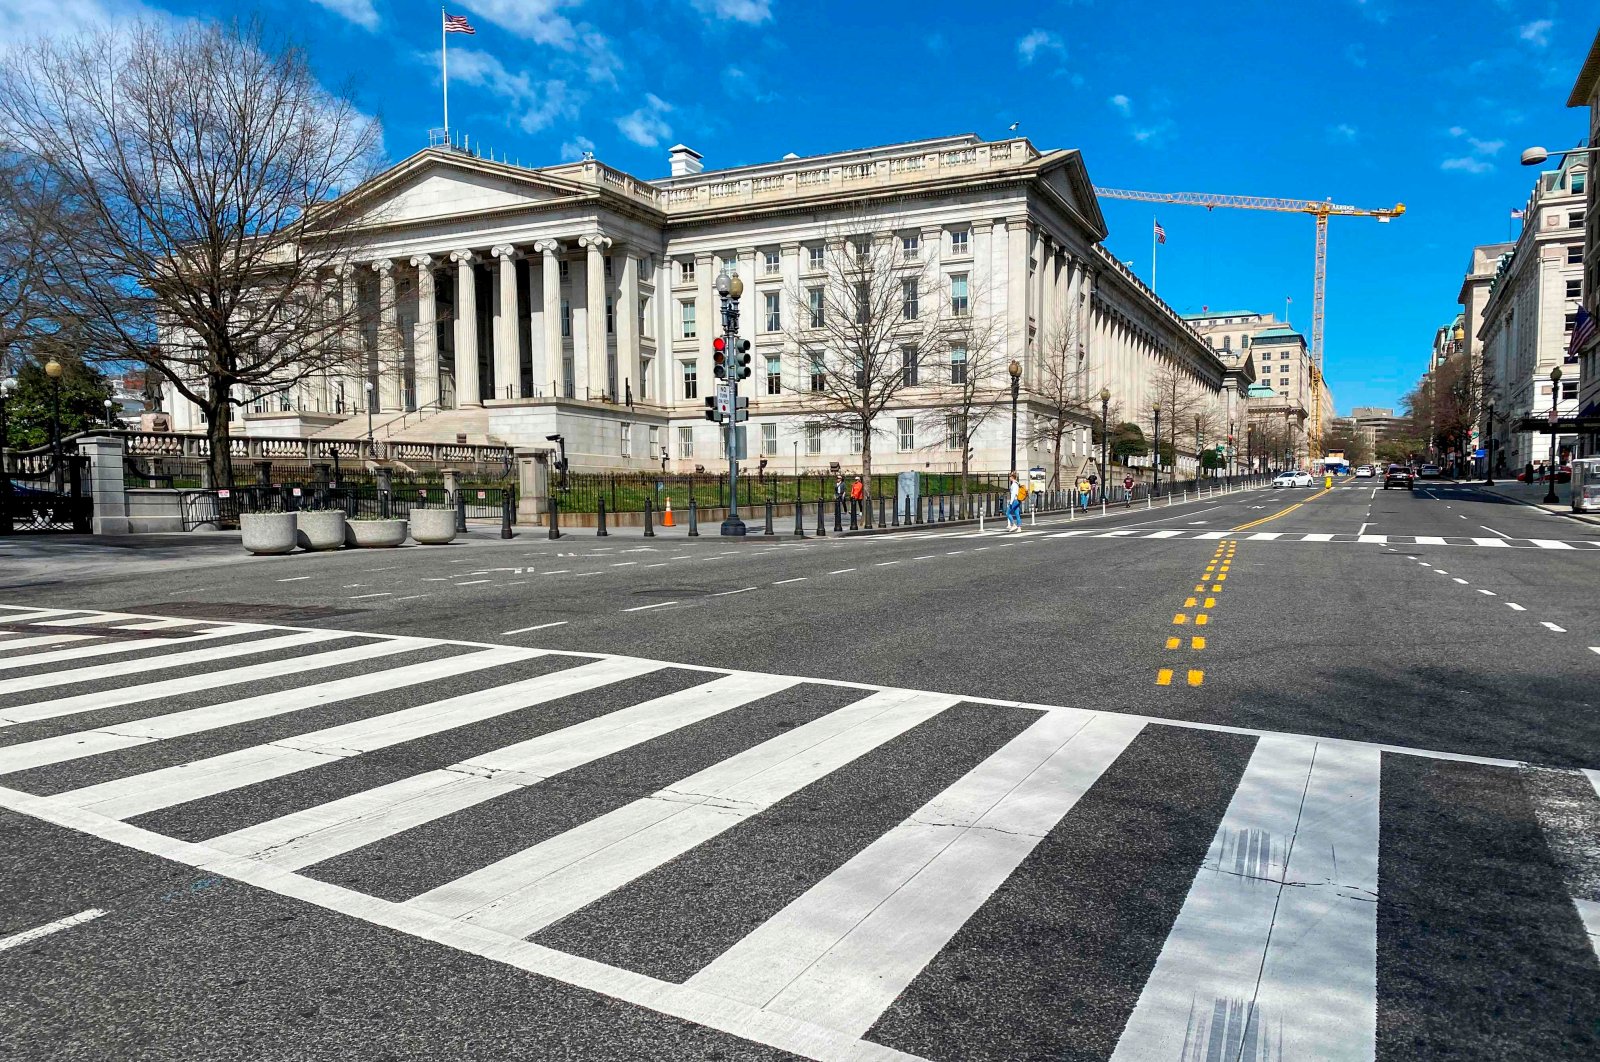 The U.S. Treasury Department building is seen next to an almost empty 15th Street at noon in Washington D.C., U.S., March 13, 2020. (AFP Photo)